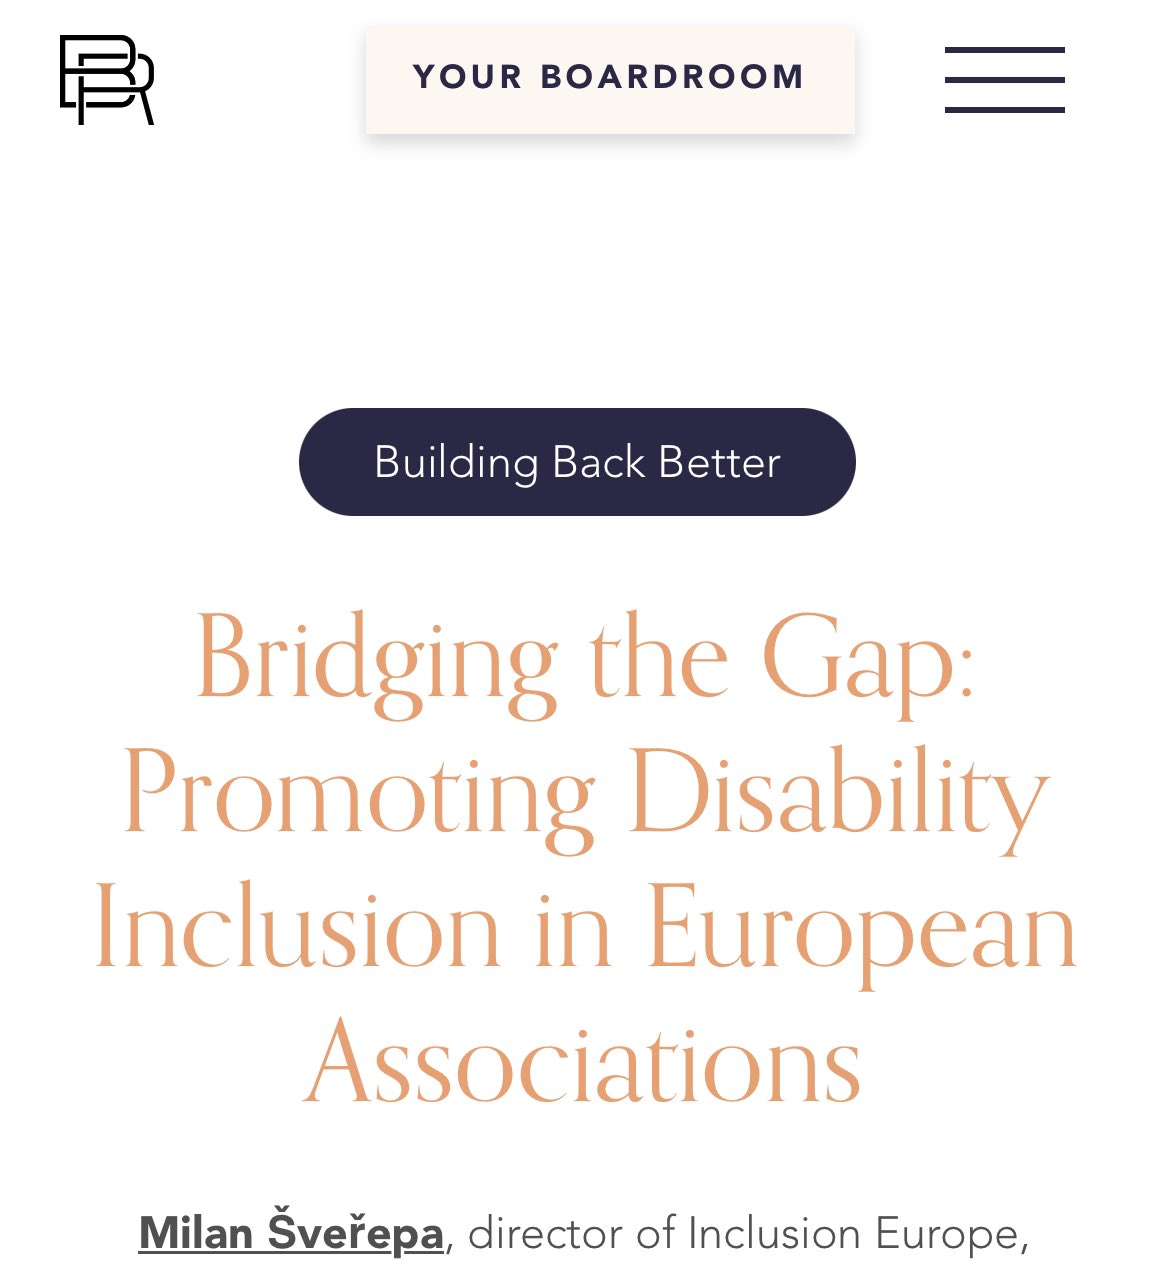 Disability inclusion in European associations